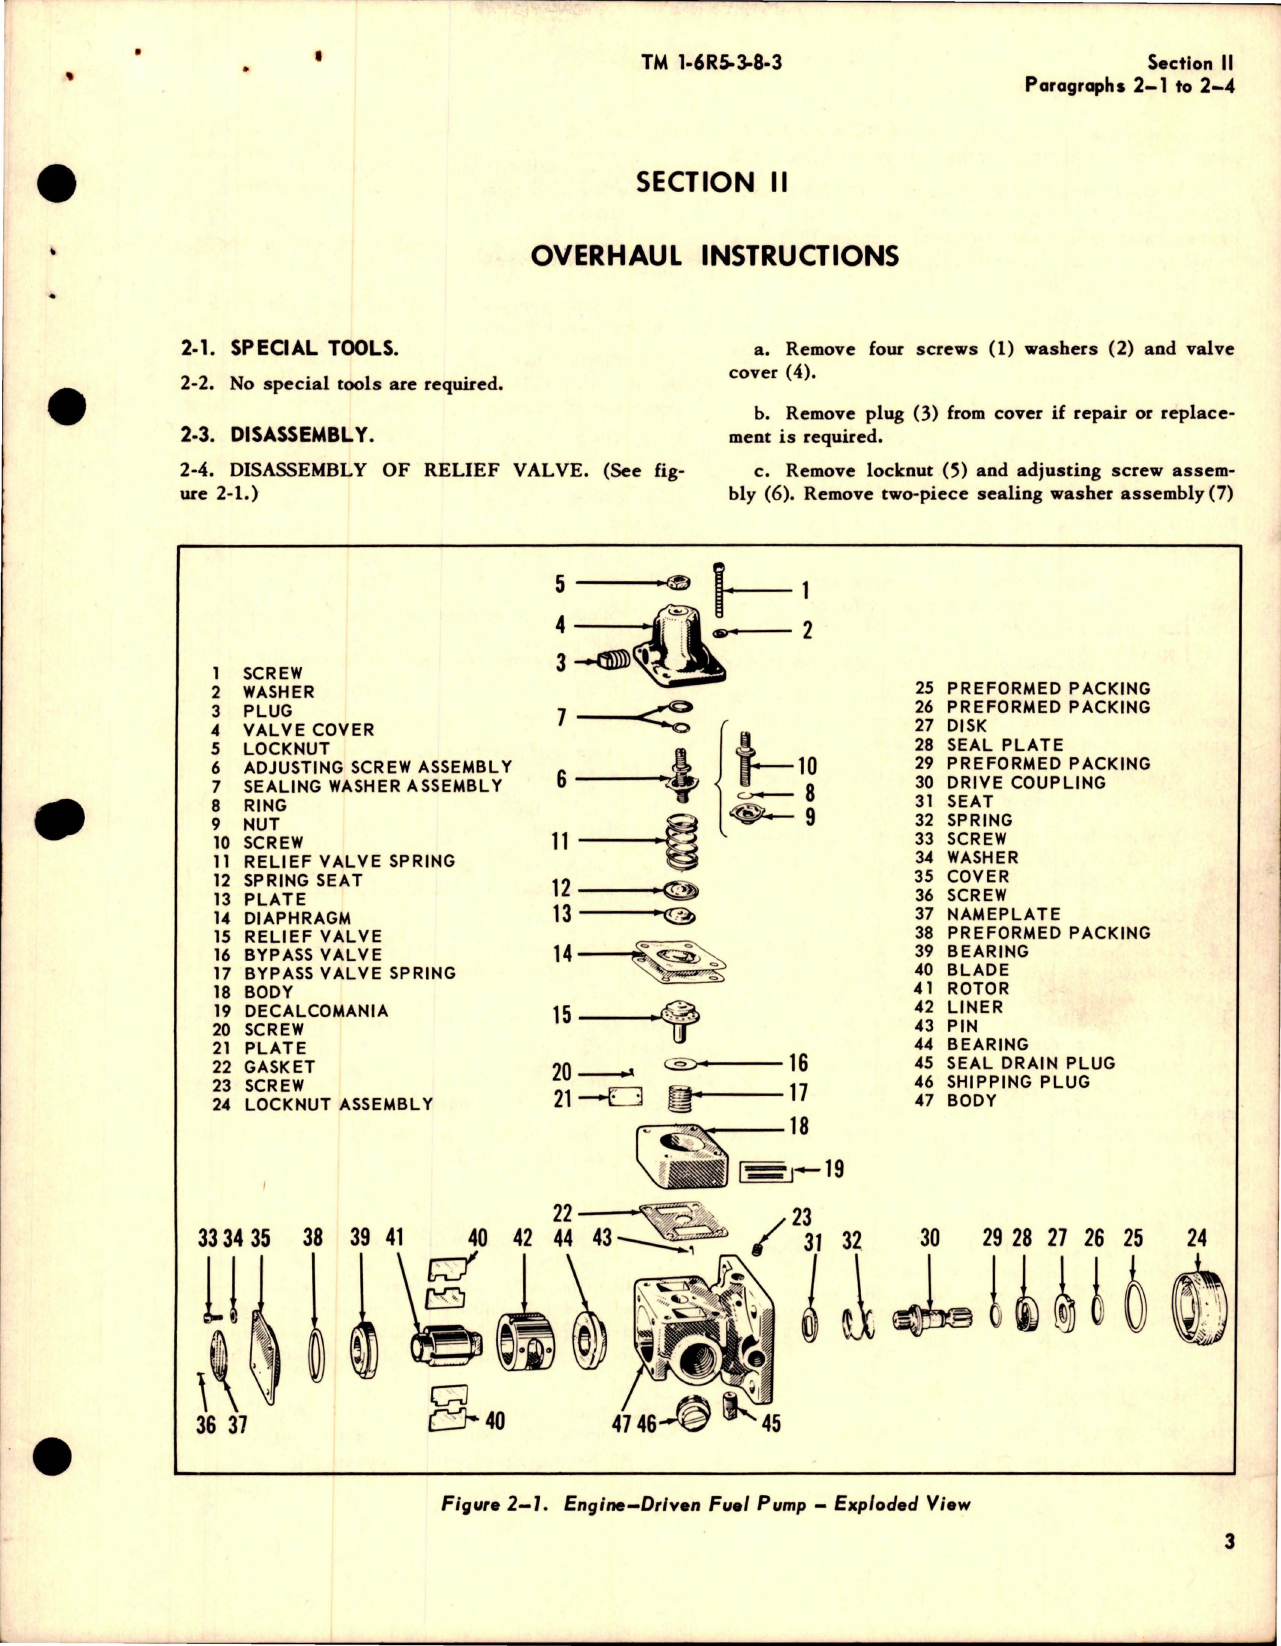 Sample page 7 from AirCorps Library document: Overhaul Instructions and Test Procedures for Engine Driven Fuel Pump - Model RG-9080 - Type G-18 